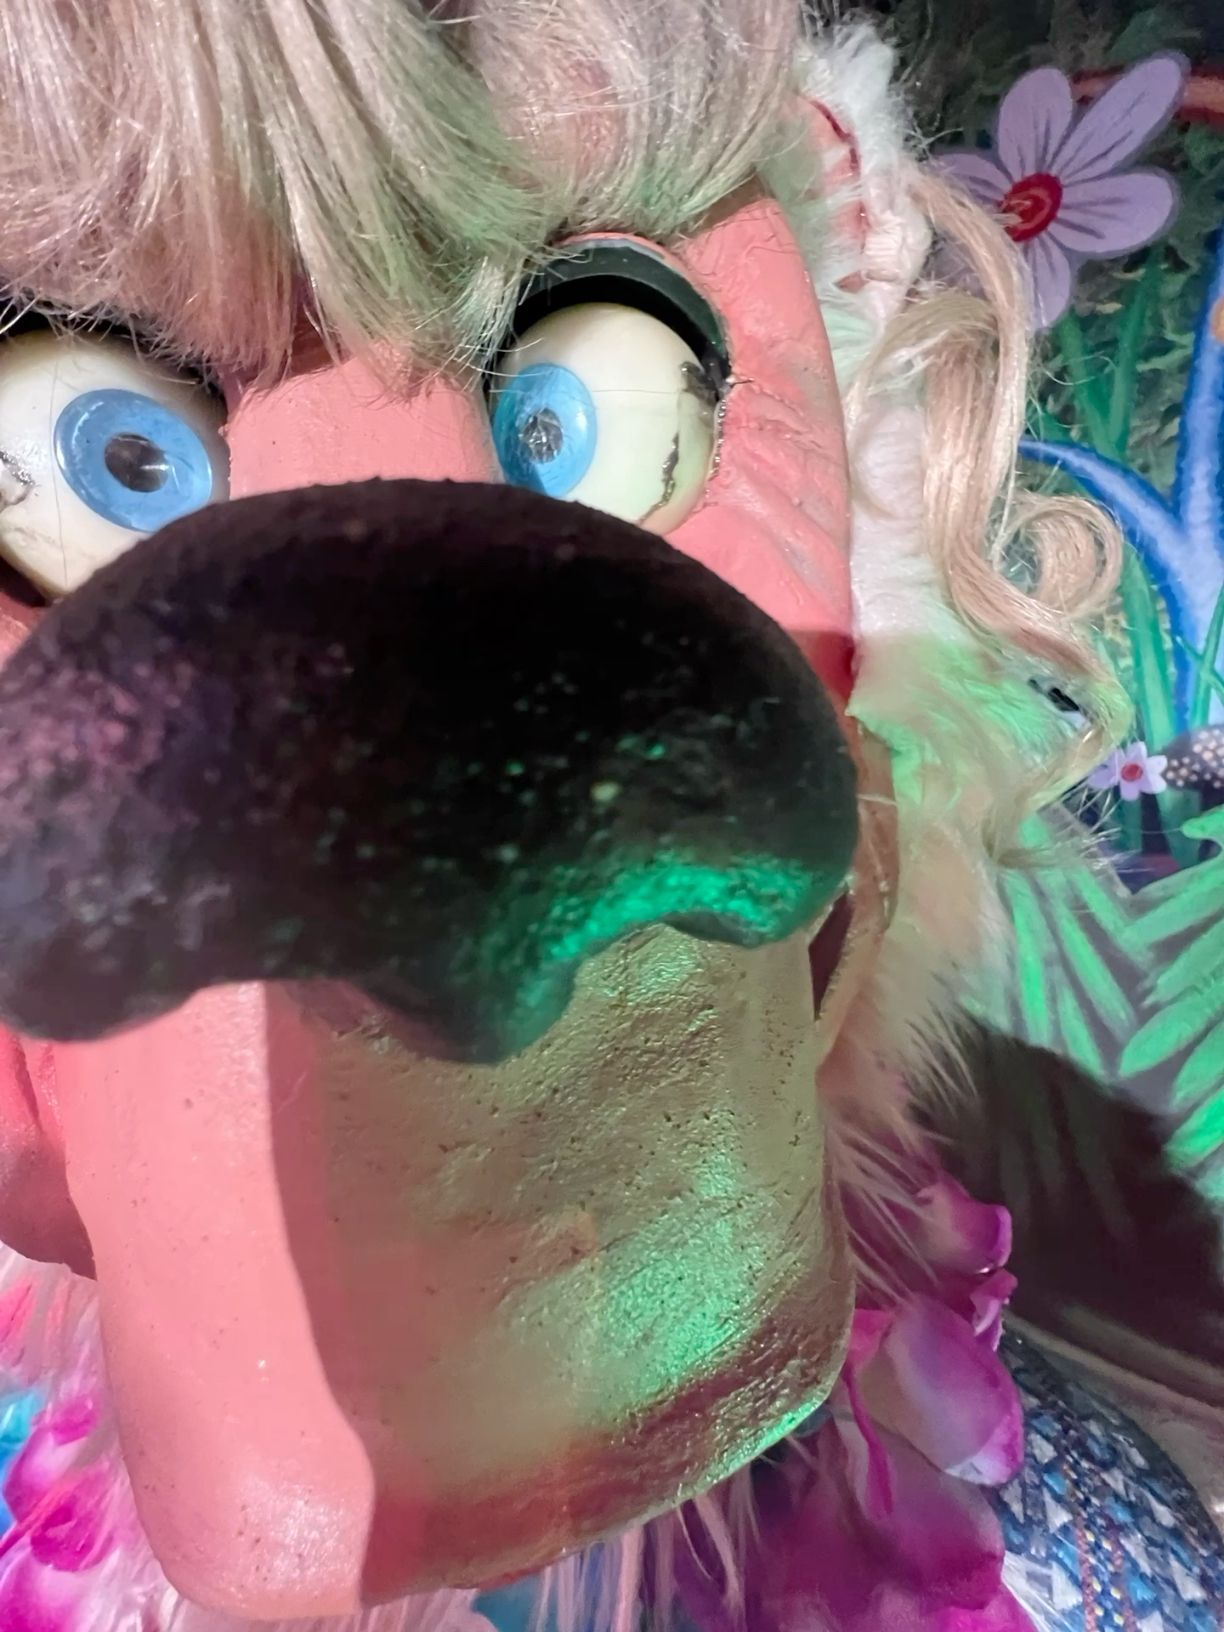 A very close up and unflattering picture of Beach Bear animatronic's face.